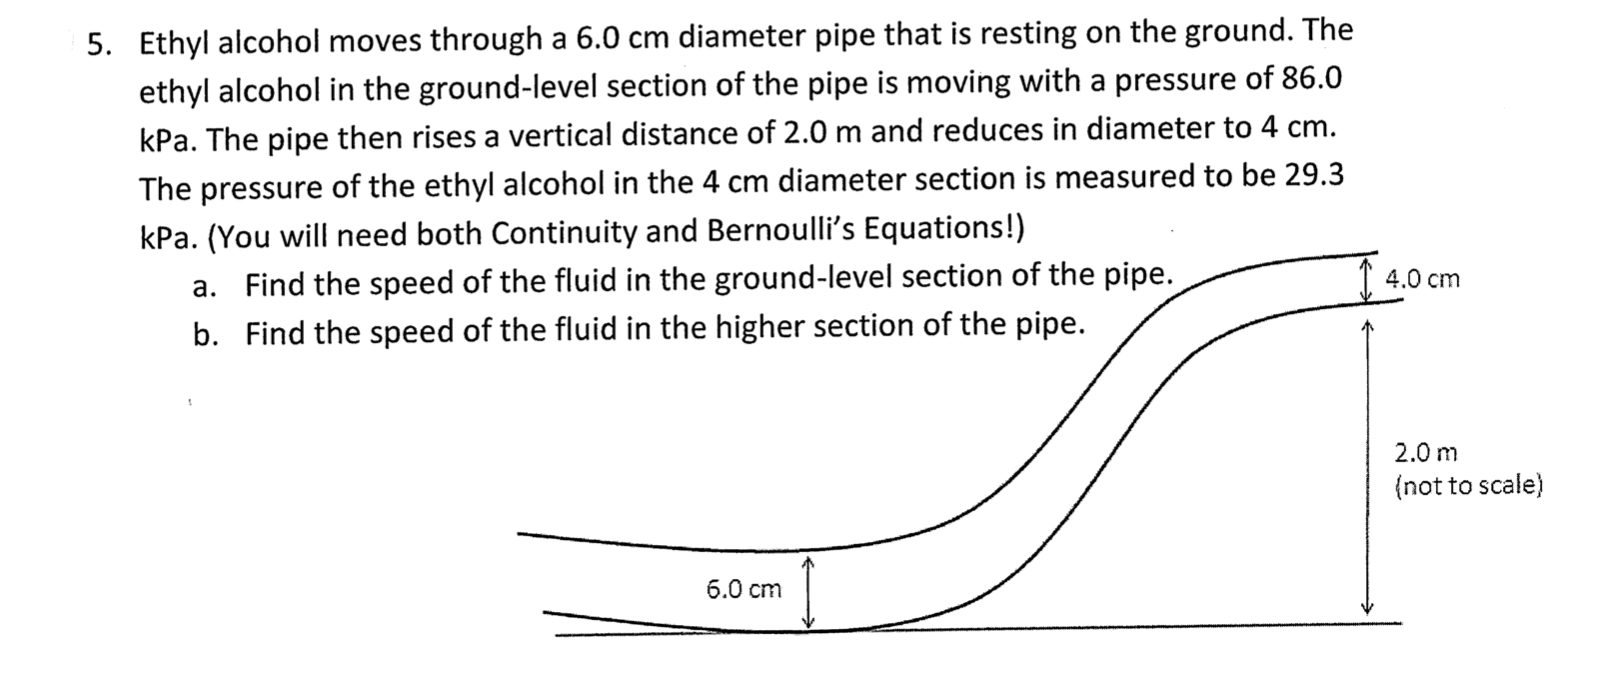 5. Ethyl alcohol moves through a 6.0 cm diameter pipe that is resting on the ground. The
ethyl alcohol in the ground-level section of the pipe is moving with a pressure of 86.0
kPa. The pipe then rises a vertical distance of 2.0 m and reduces in diameter to 4 cm.
The pressure of the ethyl alcohol in the 4 cm diameter section is measured to be 29.3
kPa. (You will need both Continuity and Bernoulli's Equations!)
1 4.0 cm
a. Find the speed of the fluid in the ground-level section of the pipe.
Find the speed of the fluid in the higher section of the pipe.
b.
2.0 m
{not to scale)
6.0 cm
